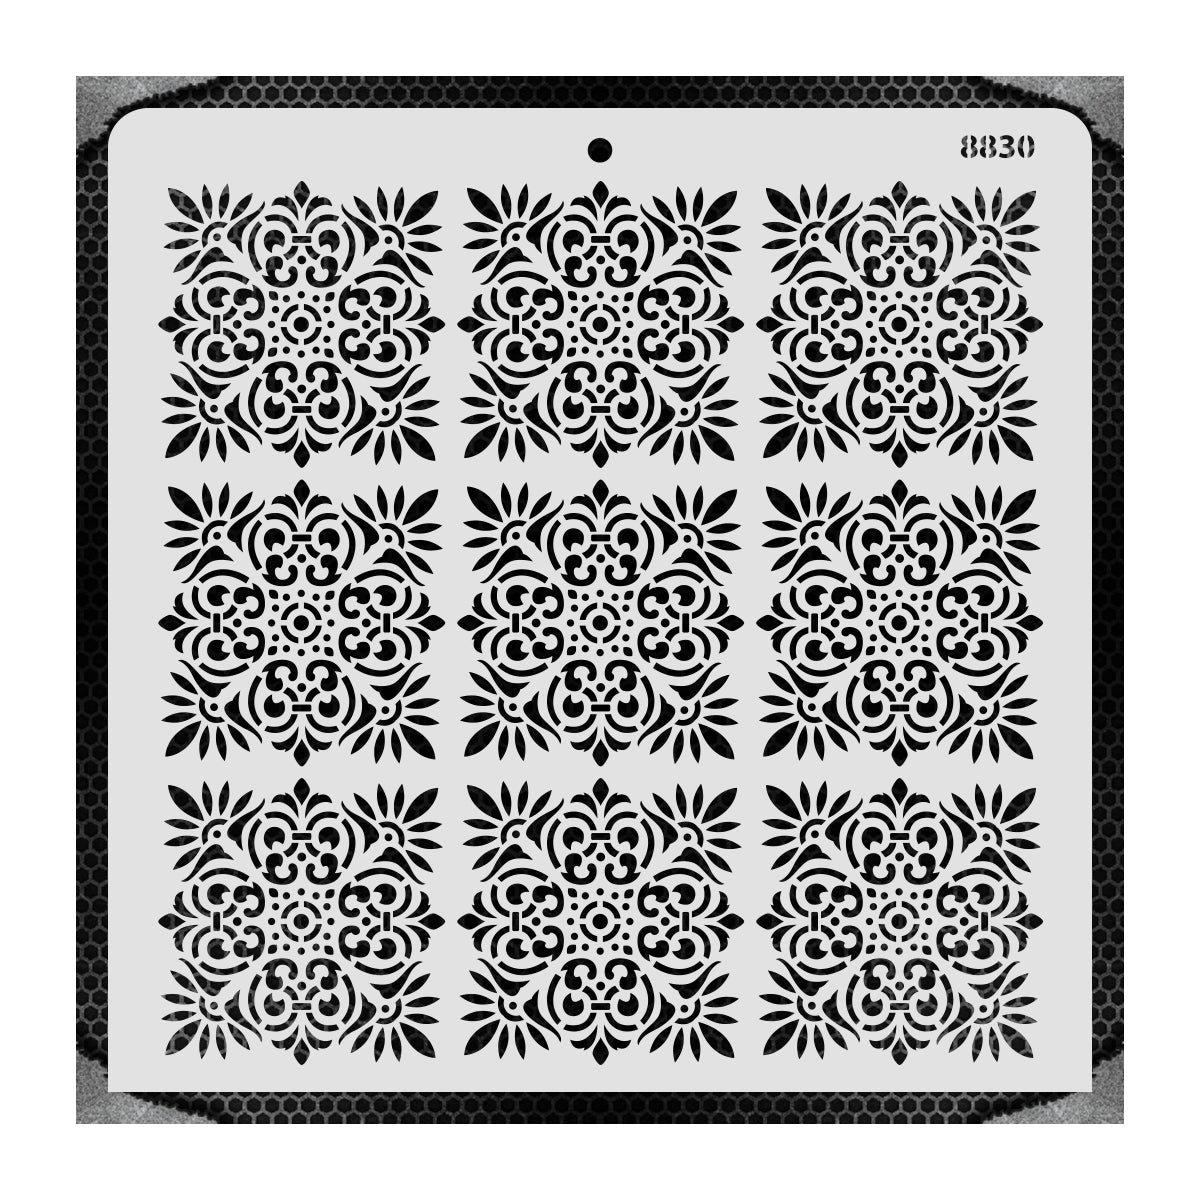 iCraft Multi-Surface Stencils - Perfect for Walls, DIY & Resin Art Projects | Reusable |12" x 12" Stencil-8830